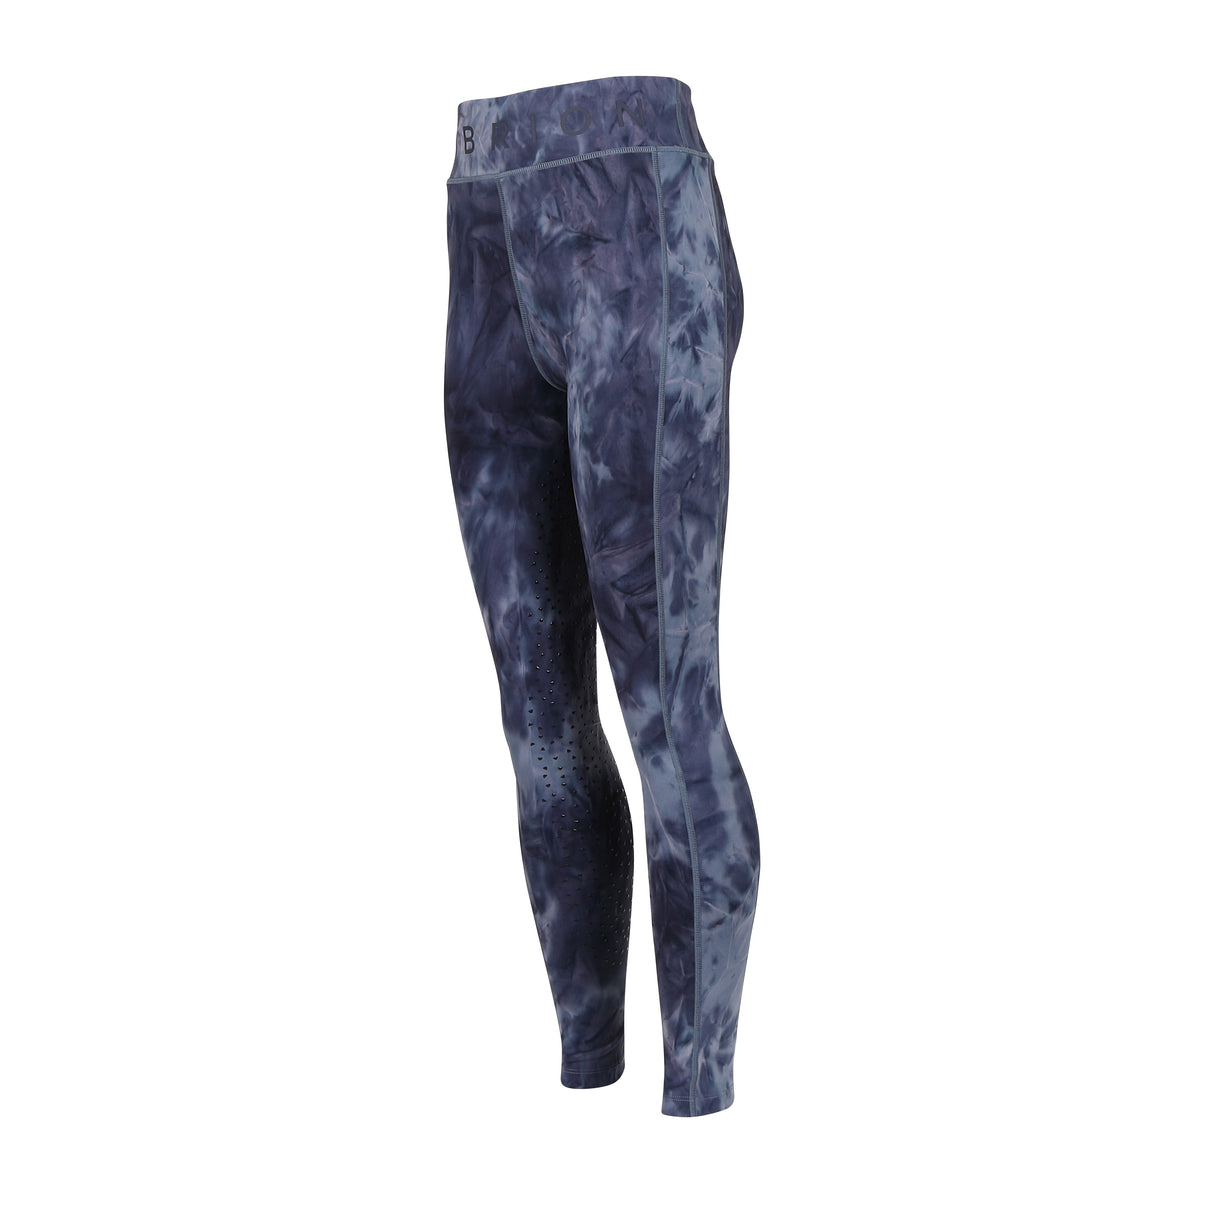 Shires Aubrion Maids Non-Stop Riding Tights #colour_navy-tie-dye